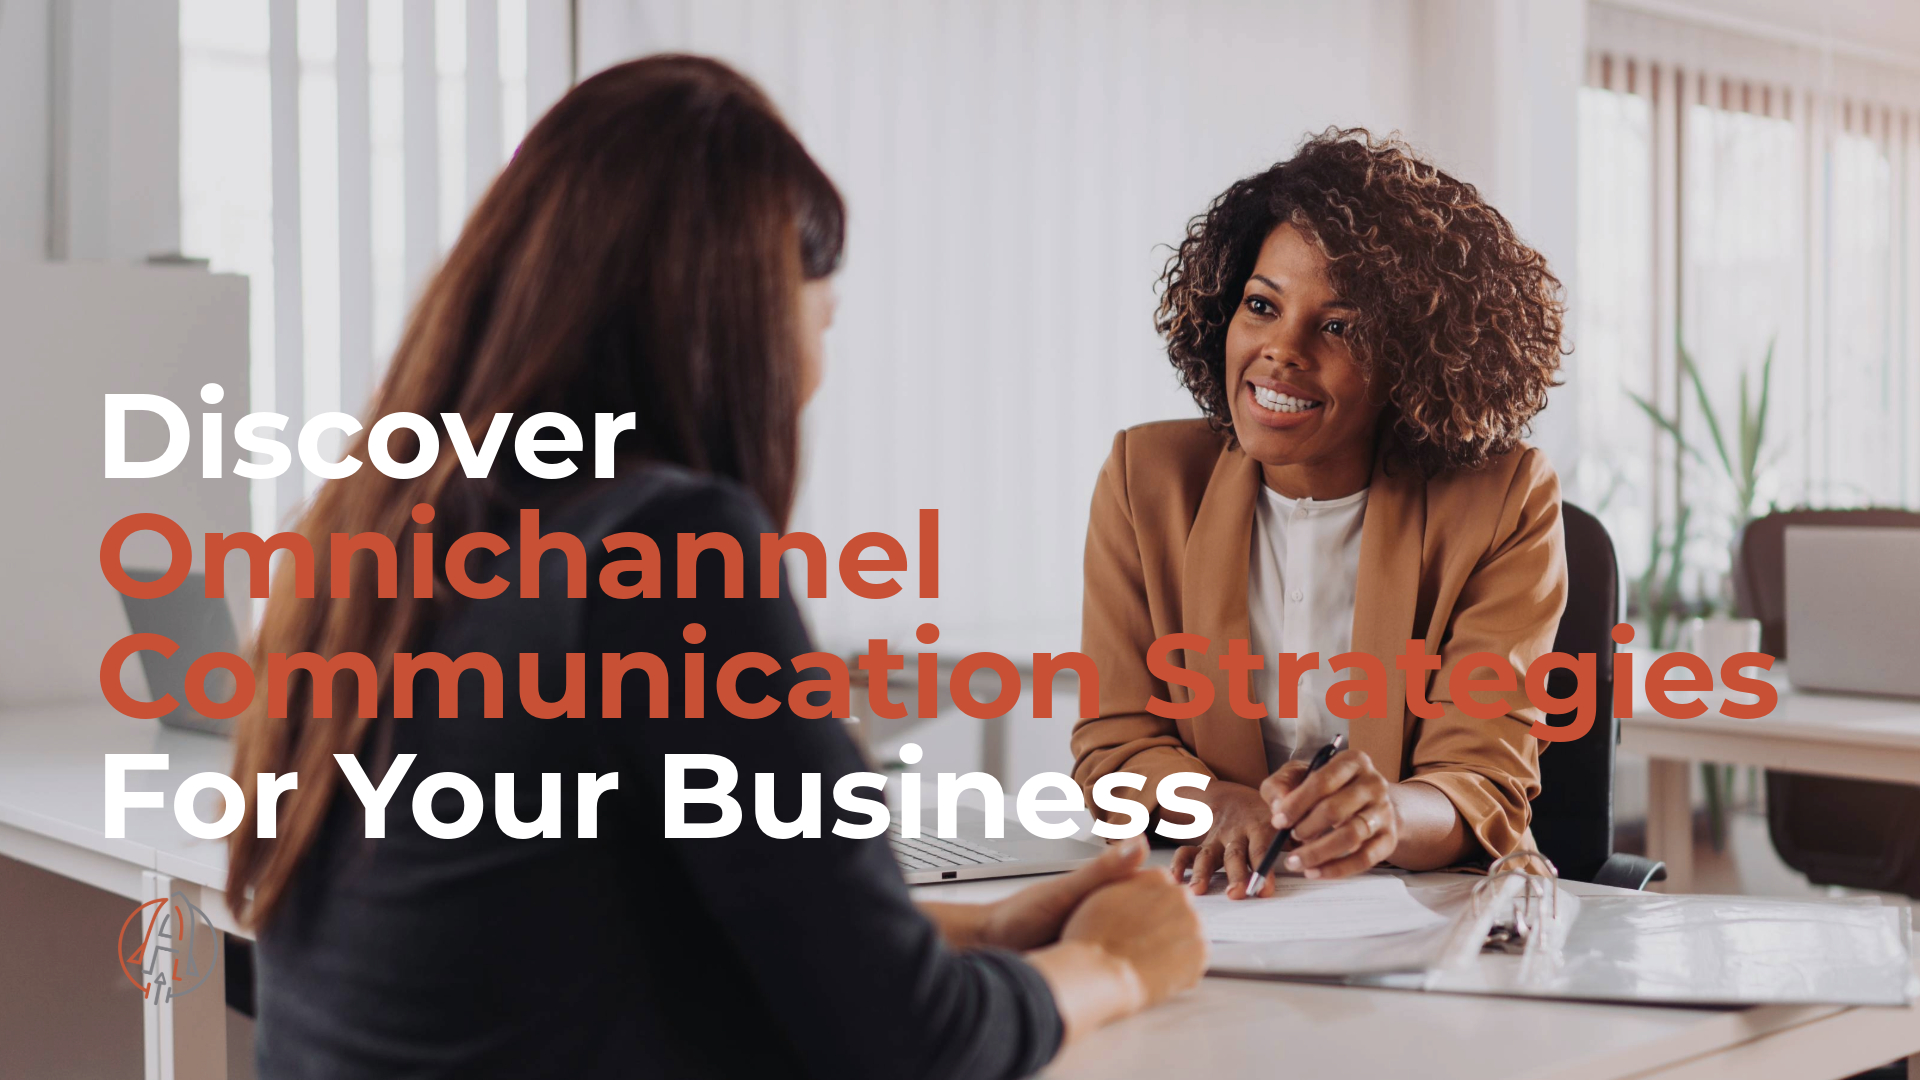 work with Lineage Accelerate on omnichannel communication strategies